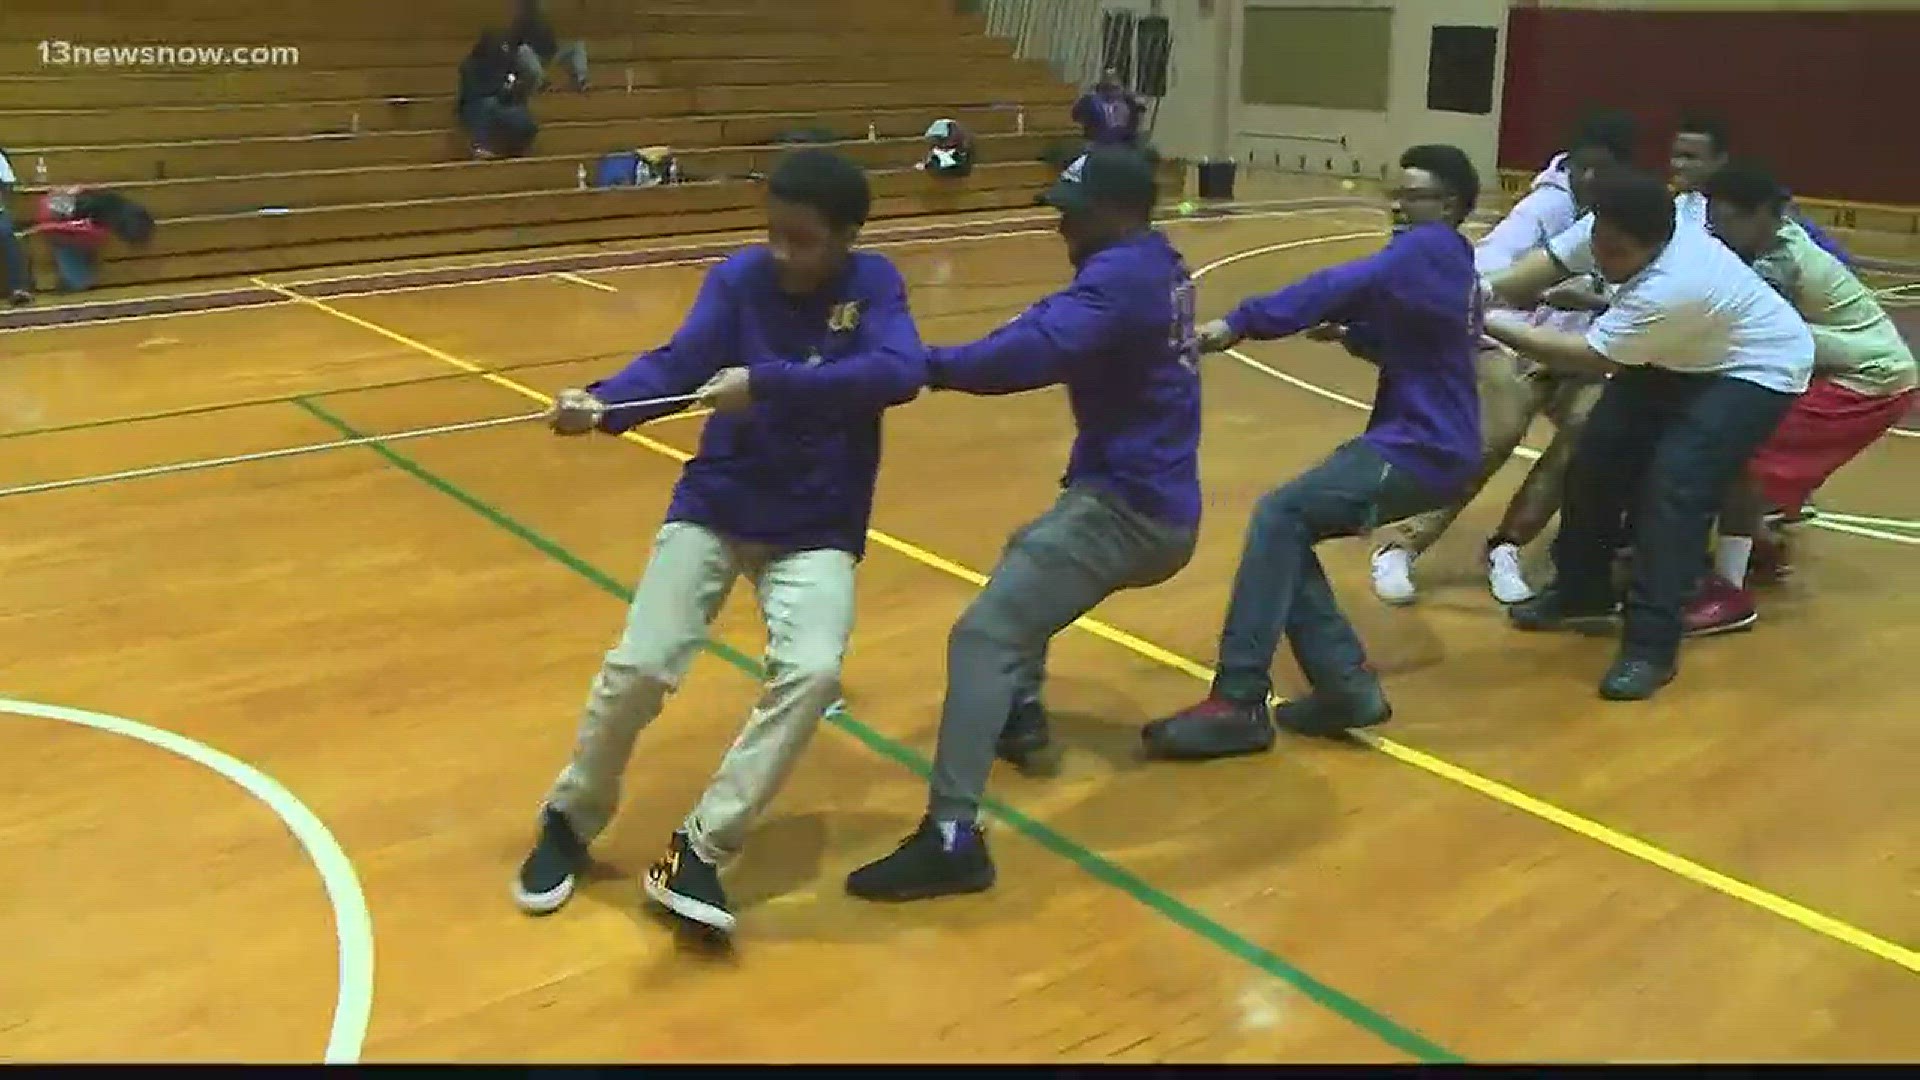 The event in Norfolk promotes healthy lifestyles for teenagers.